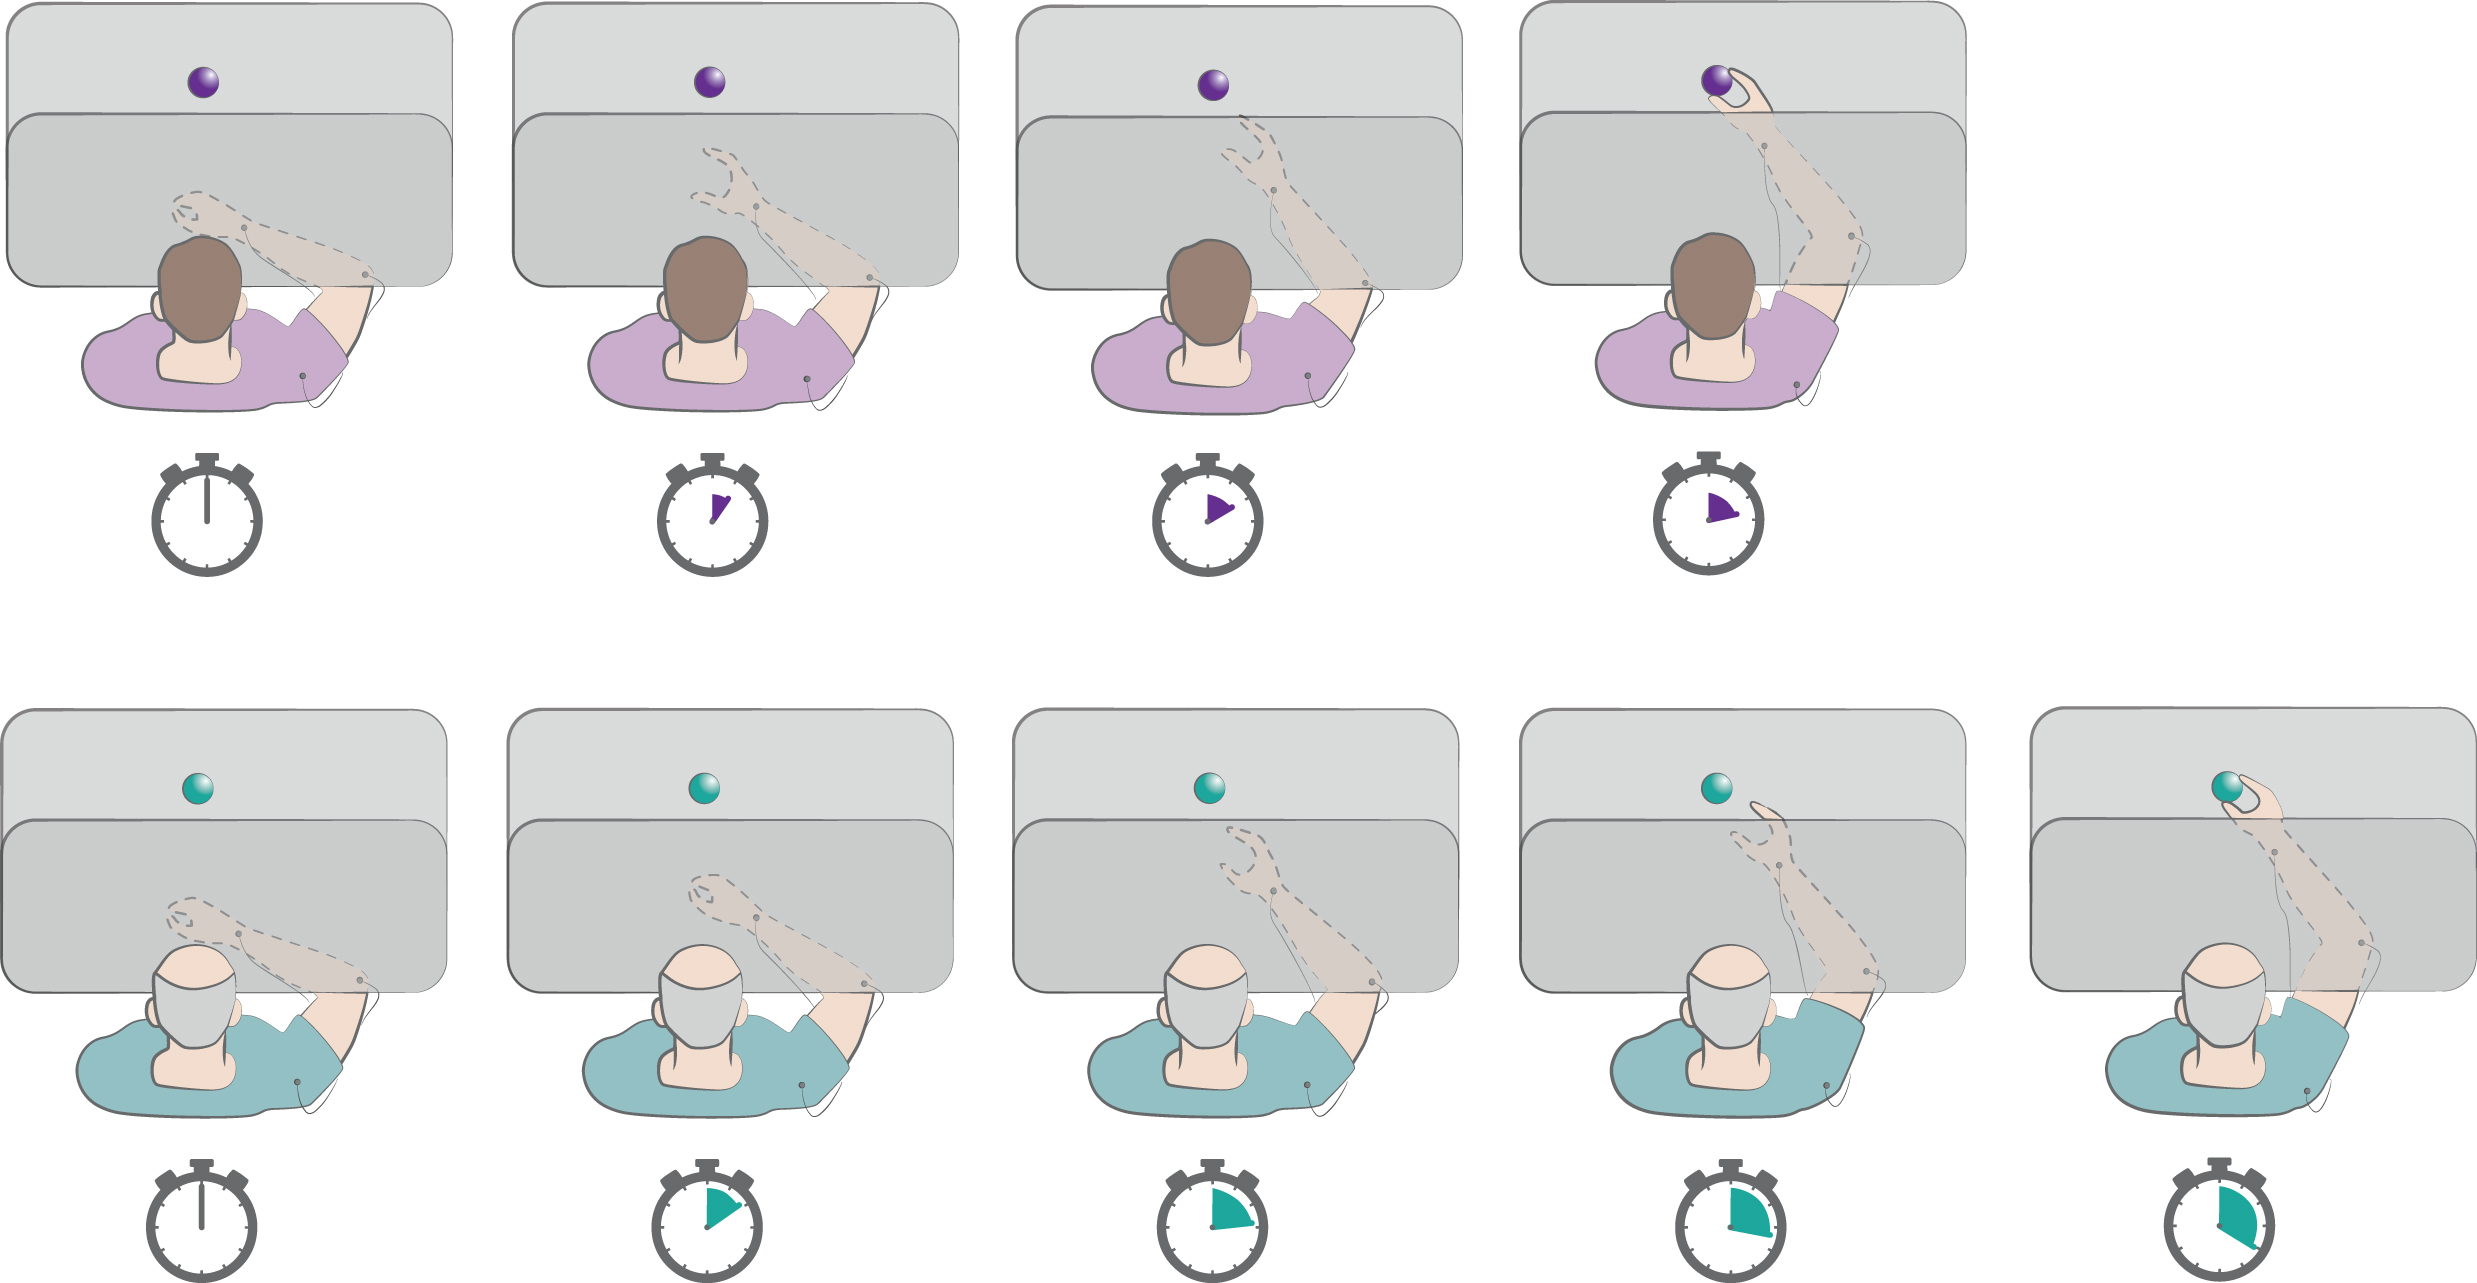 Reach-to-grasp task. In this task the subject is instructed to reach and grasp a visible object on the table as fast as possible. The vision of the moving hand can be occluded. The depicted chronometers indicate the timing of performance by a healthy subject (violet) and a PD patient (green). The patients generally show bradykinesia of transport, as well as delayed and smaller hand aperture. Refer to text for details.